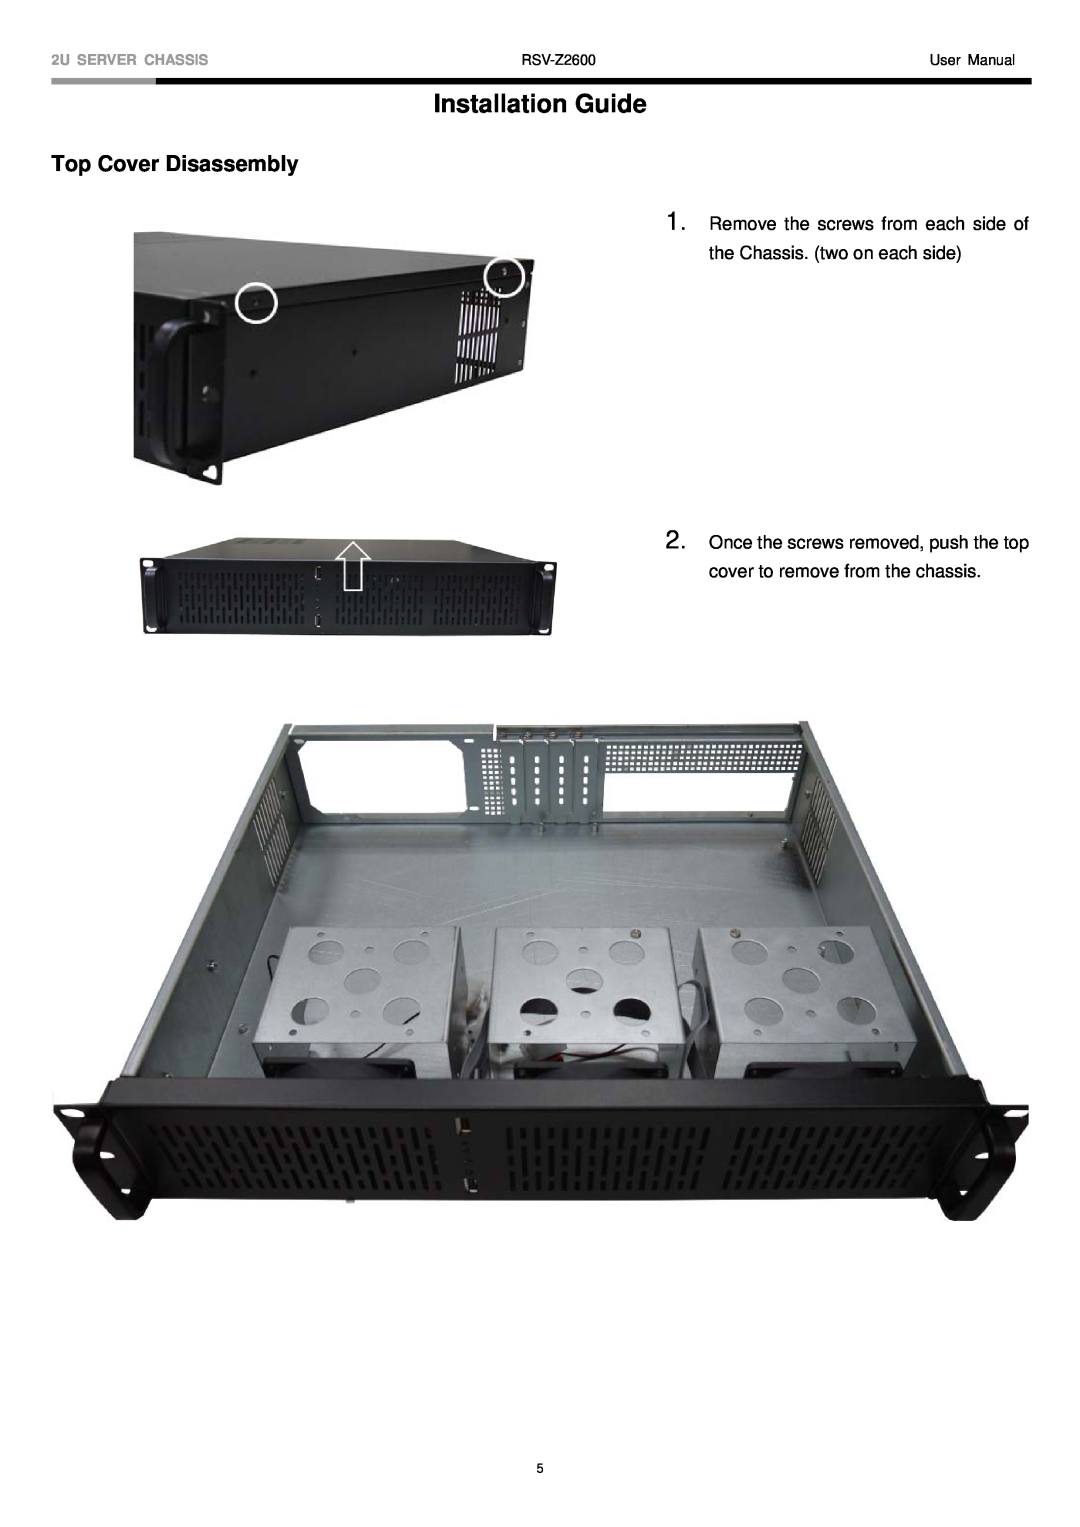 Rosewill RSV-Z2600 user manual Installation Guide, Top Cover Disassembly, 2U SERVER CHASSIS, User Manual 